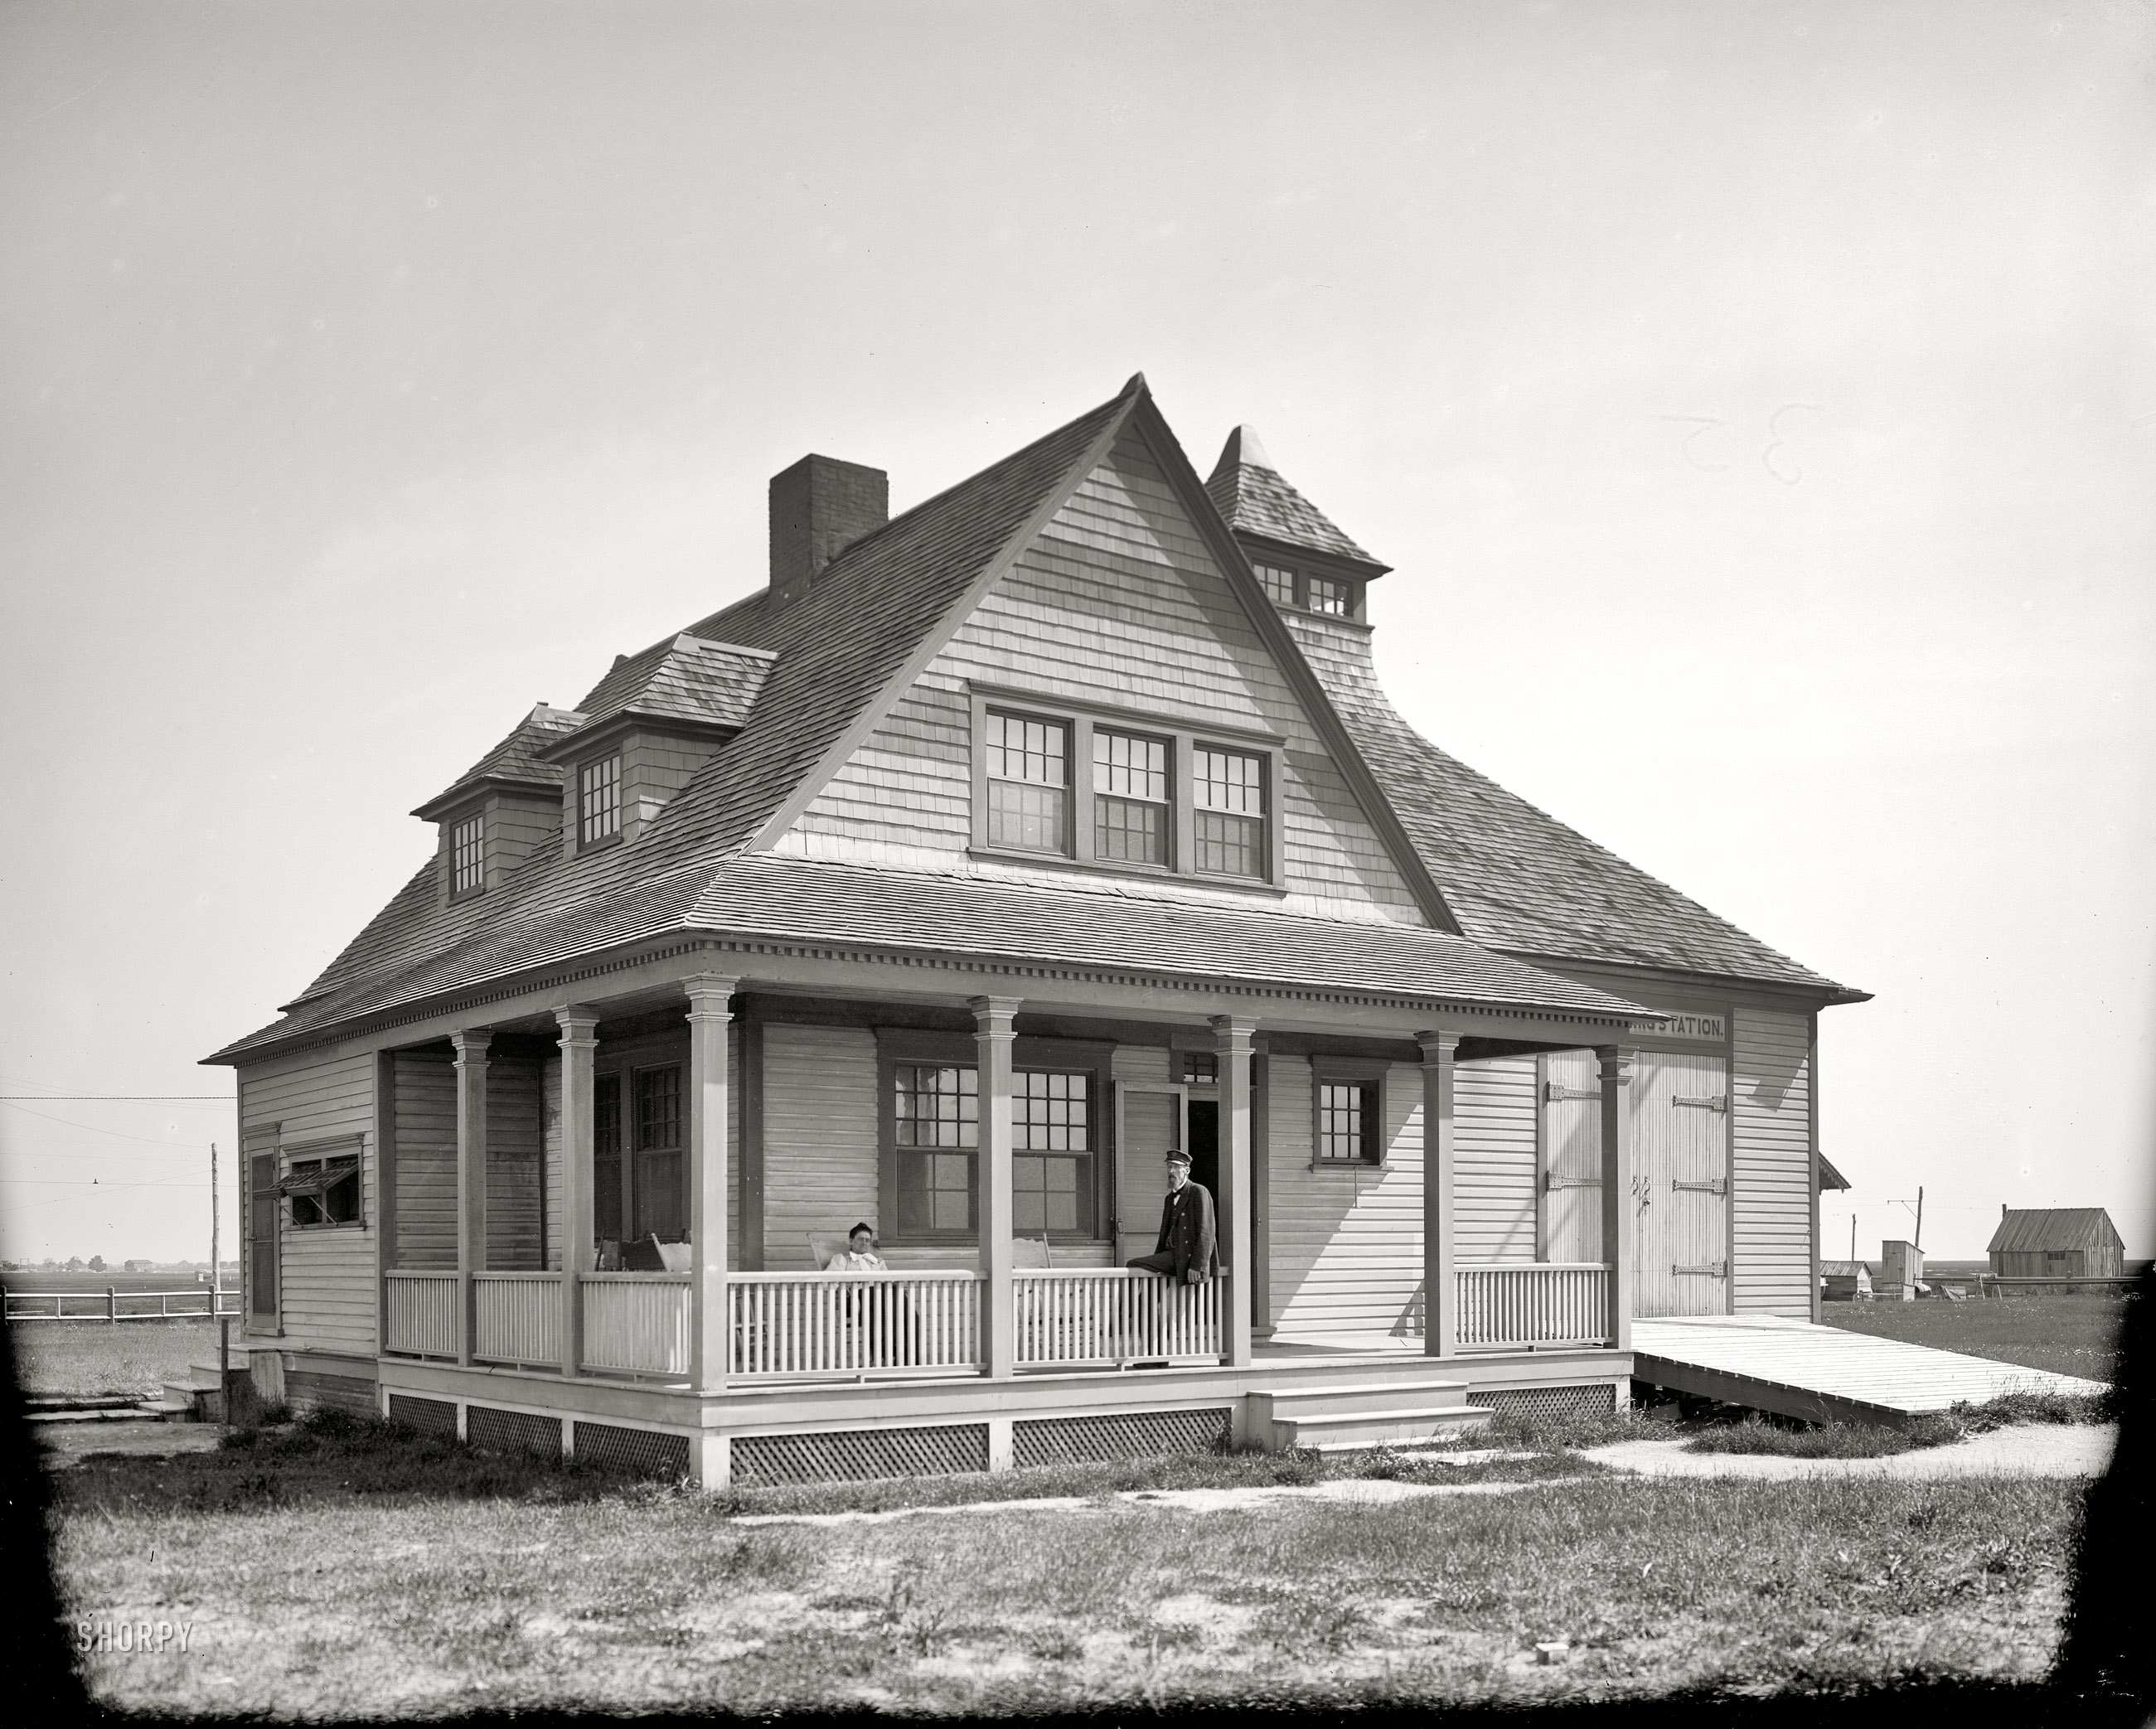 Cape May, New Jersey, circa 1913. "Life saving station at Cape May Point." 8x10 inch dry plate glass negative, Detroit Publishing Company. View full size.